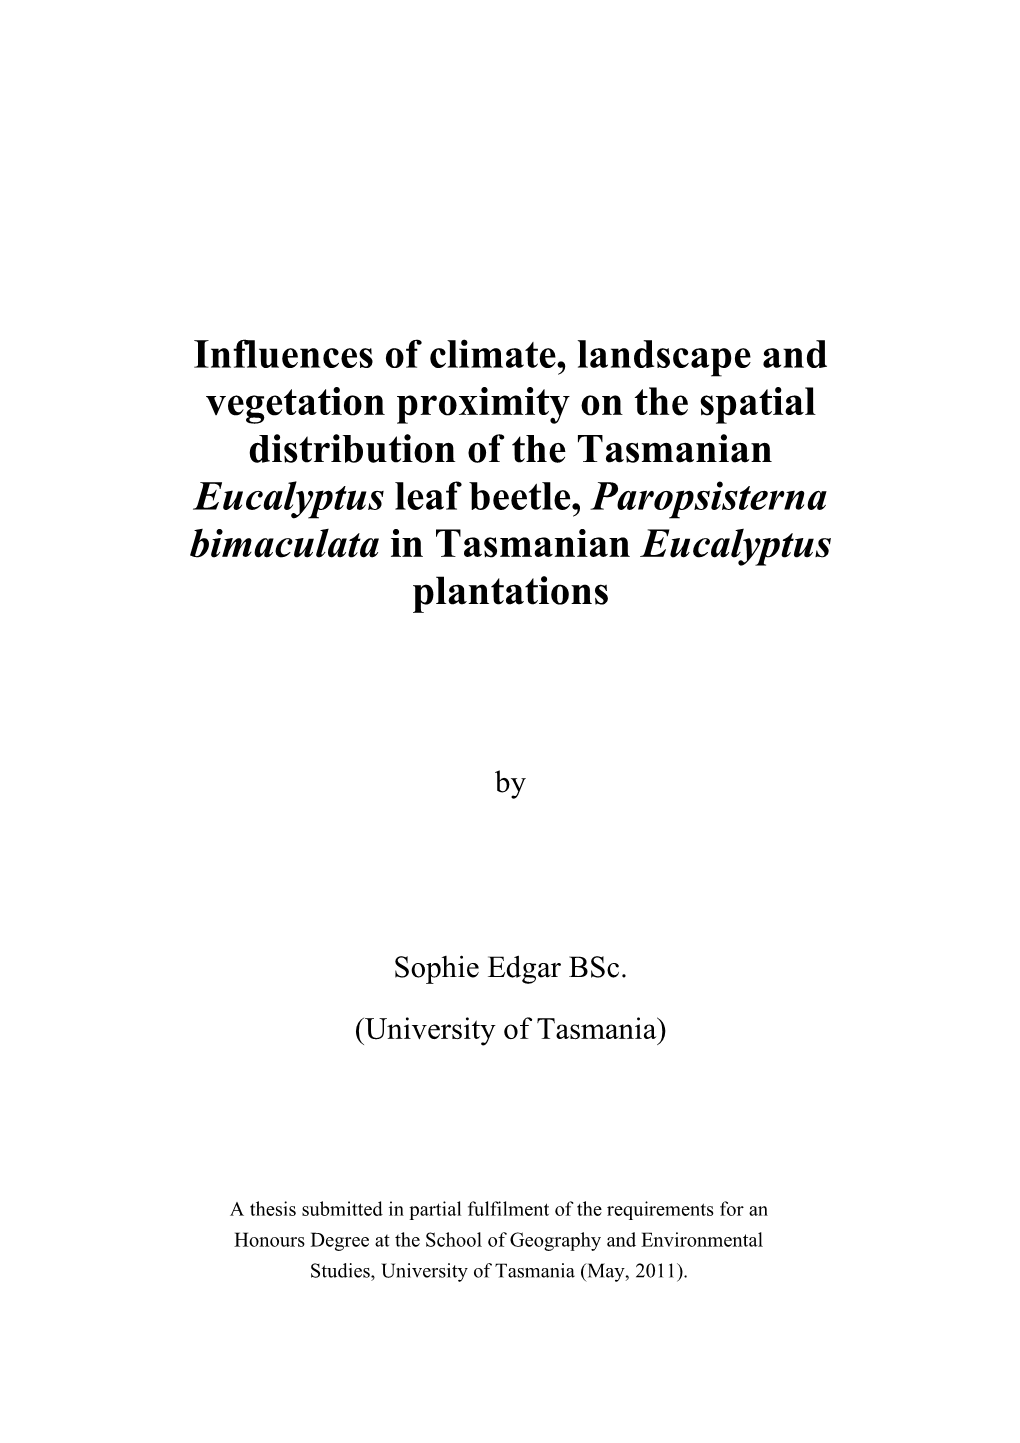 Influences of Climate, Landscape and Vegetation Proximity on the Spatial